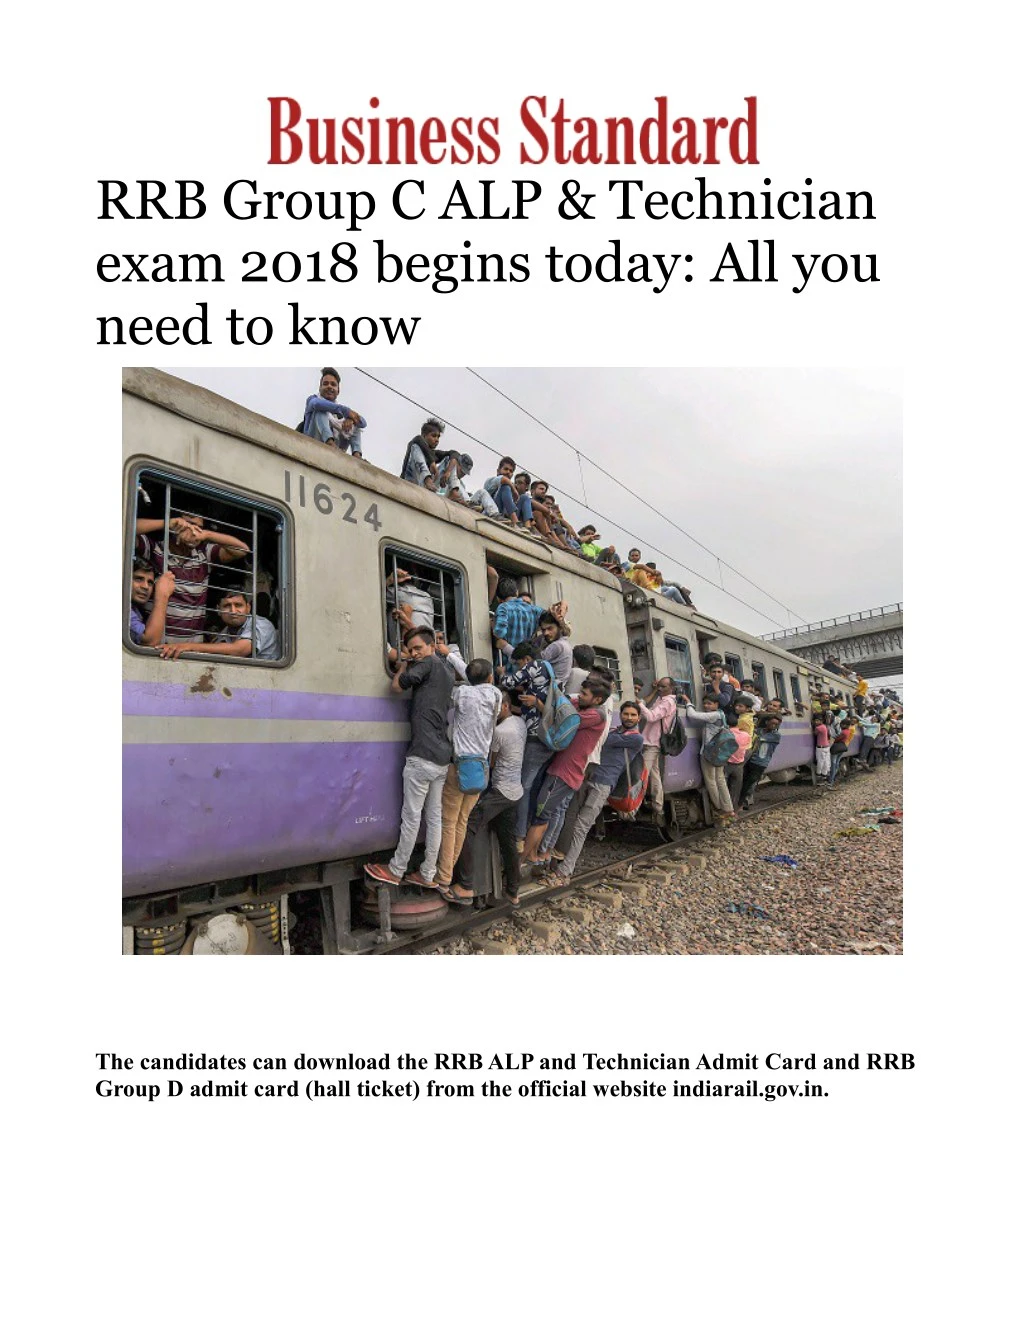 rrb group c alp technician exam 2018 begins today